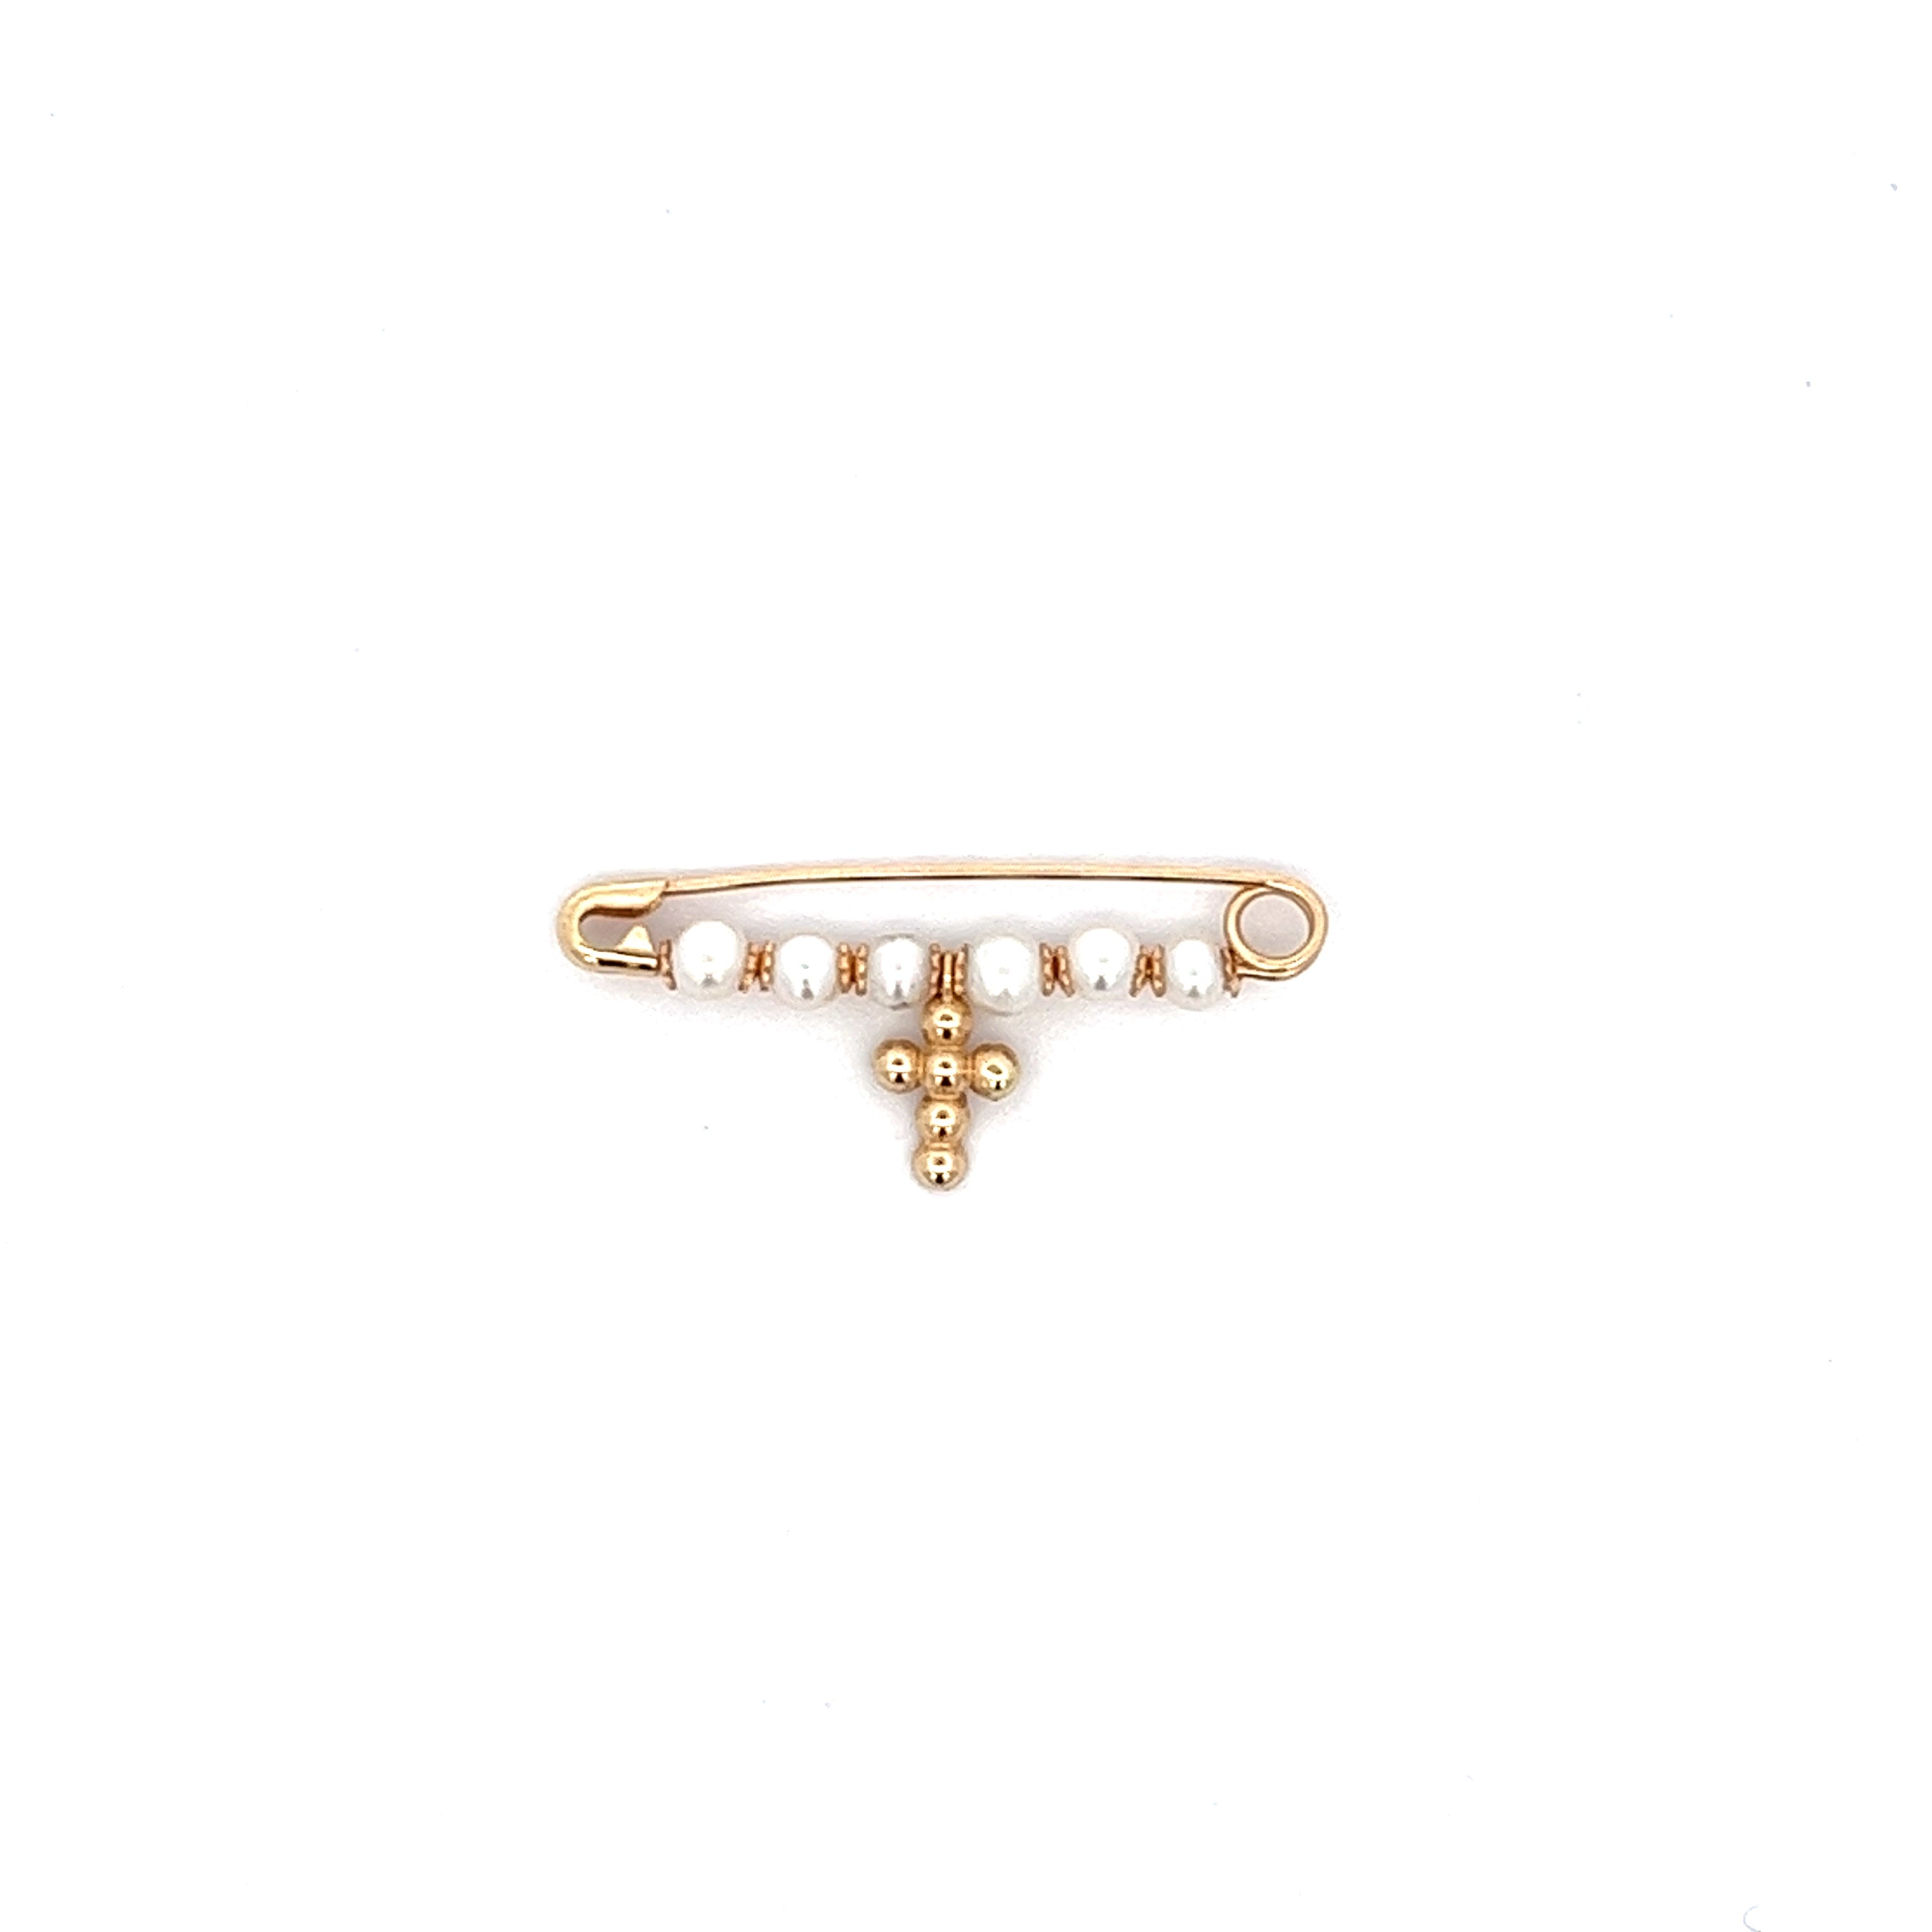 14K GOLD PIN WITH PEARLS AND CROSS PENDANT